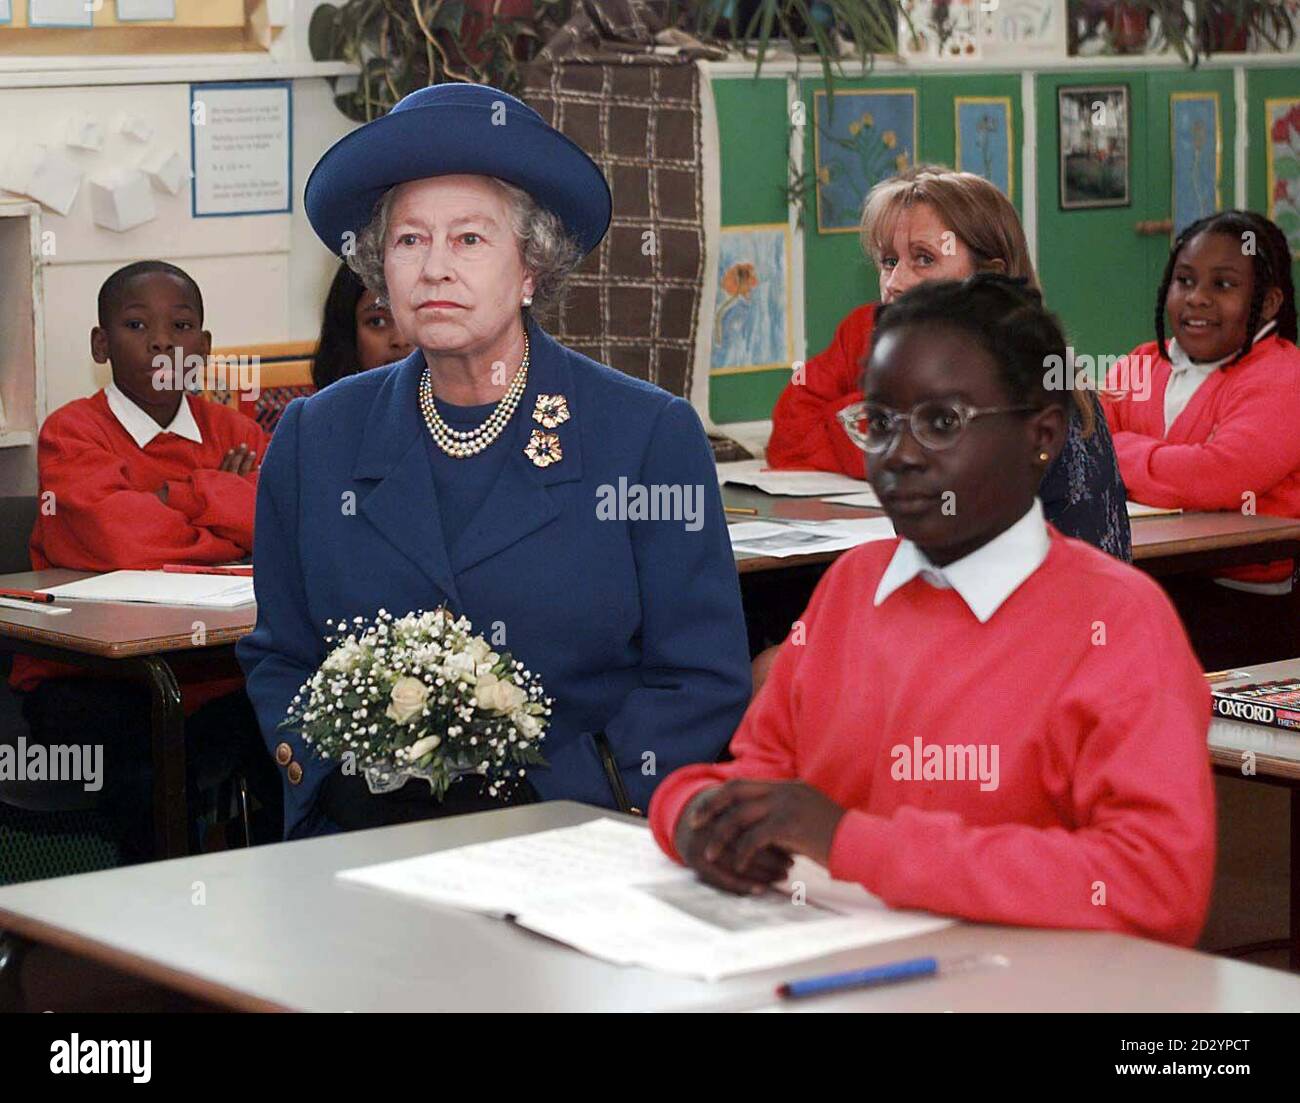 The Queen sits amongst pupils at The Sir James Barrie School in south west London during her visit to the borough of Wandsworth today (Wednesday).  Rota picture by Ian Jones/Telegraph. Stock Photo